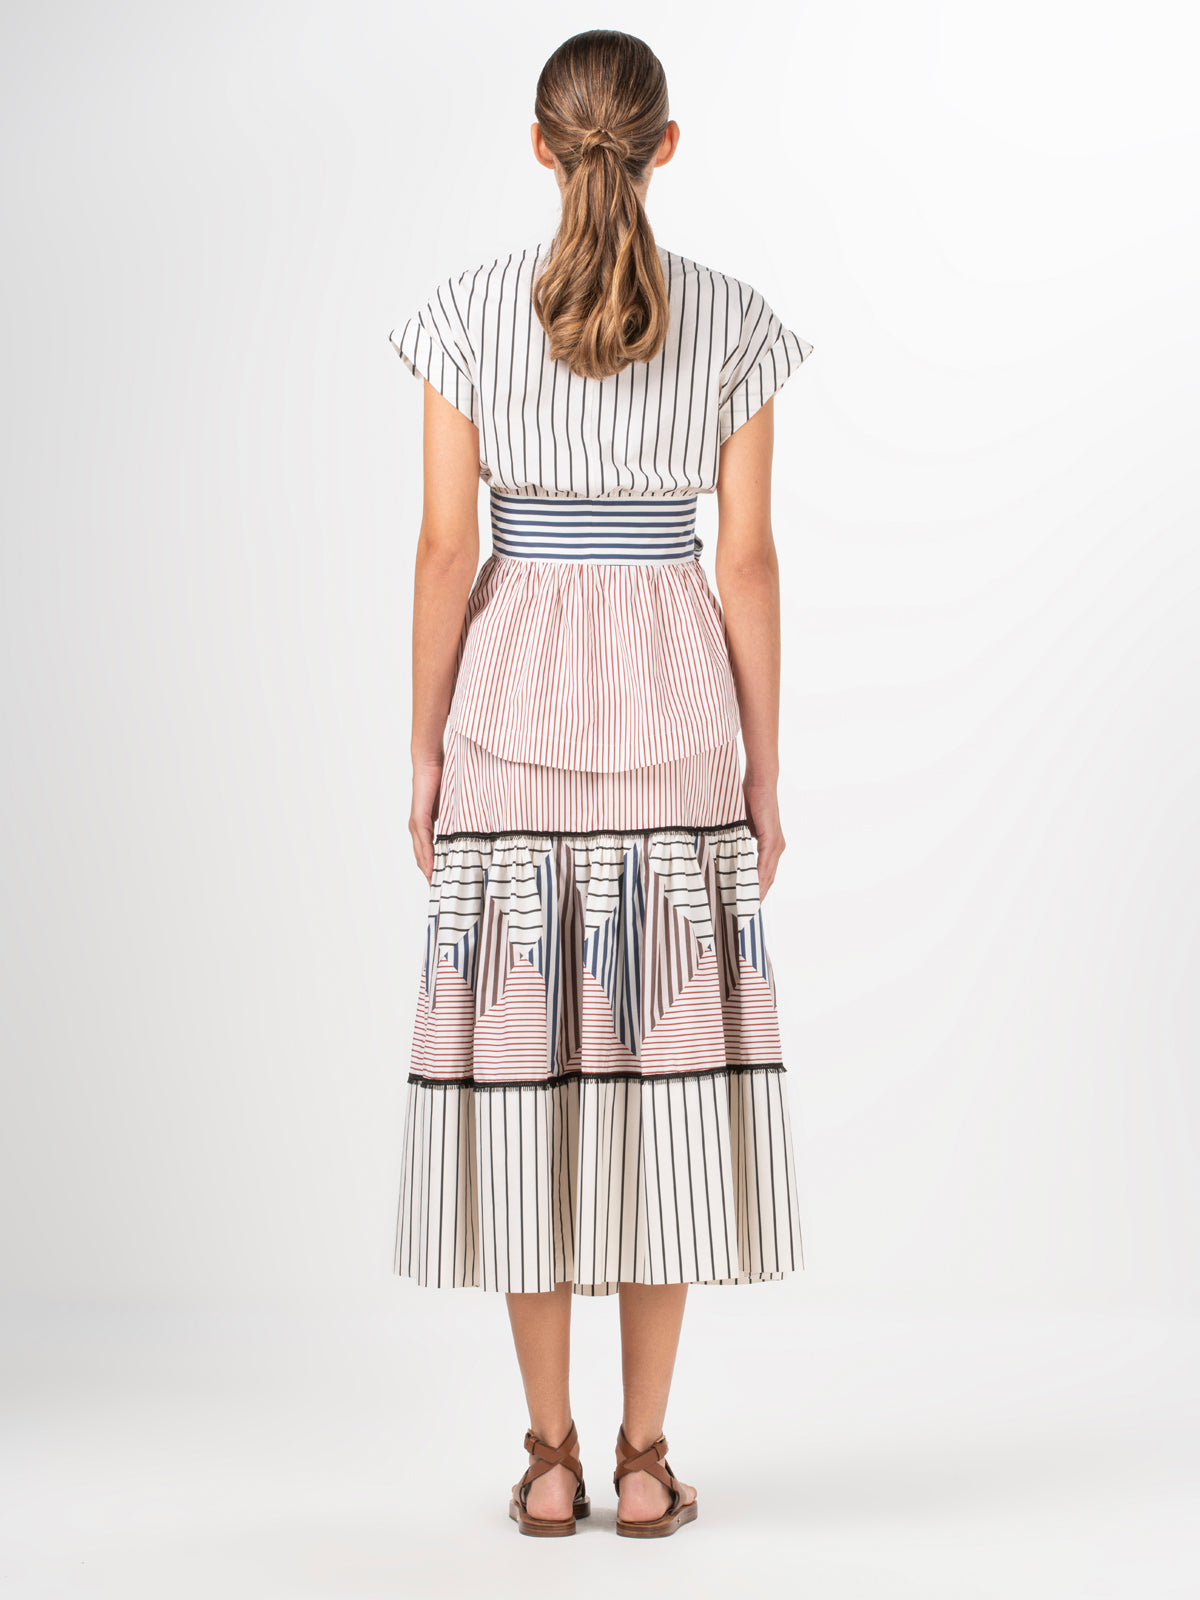 A white and blue striped Elia blouse with a bow, made of cotton fabric.